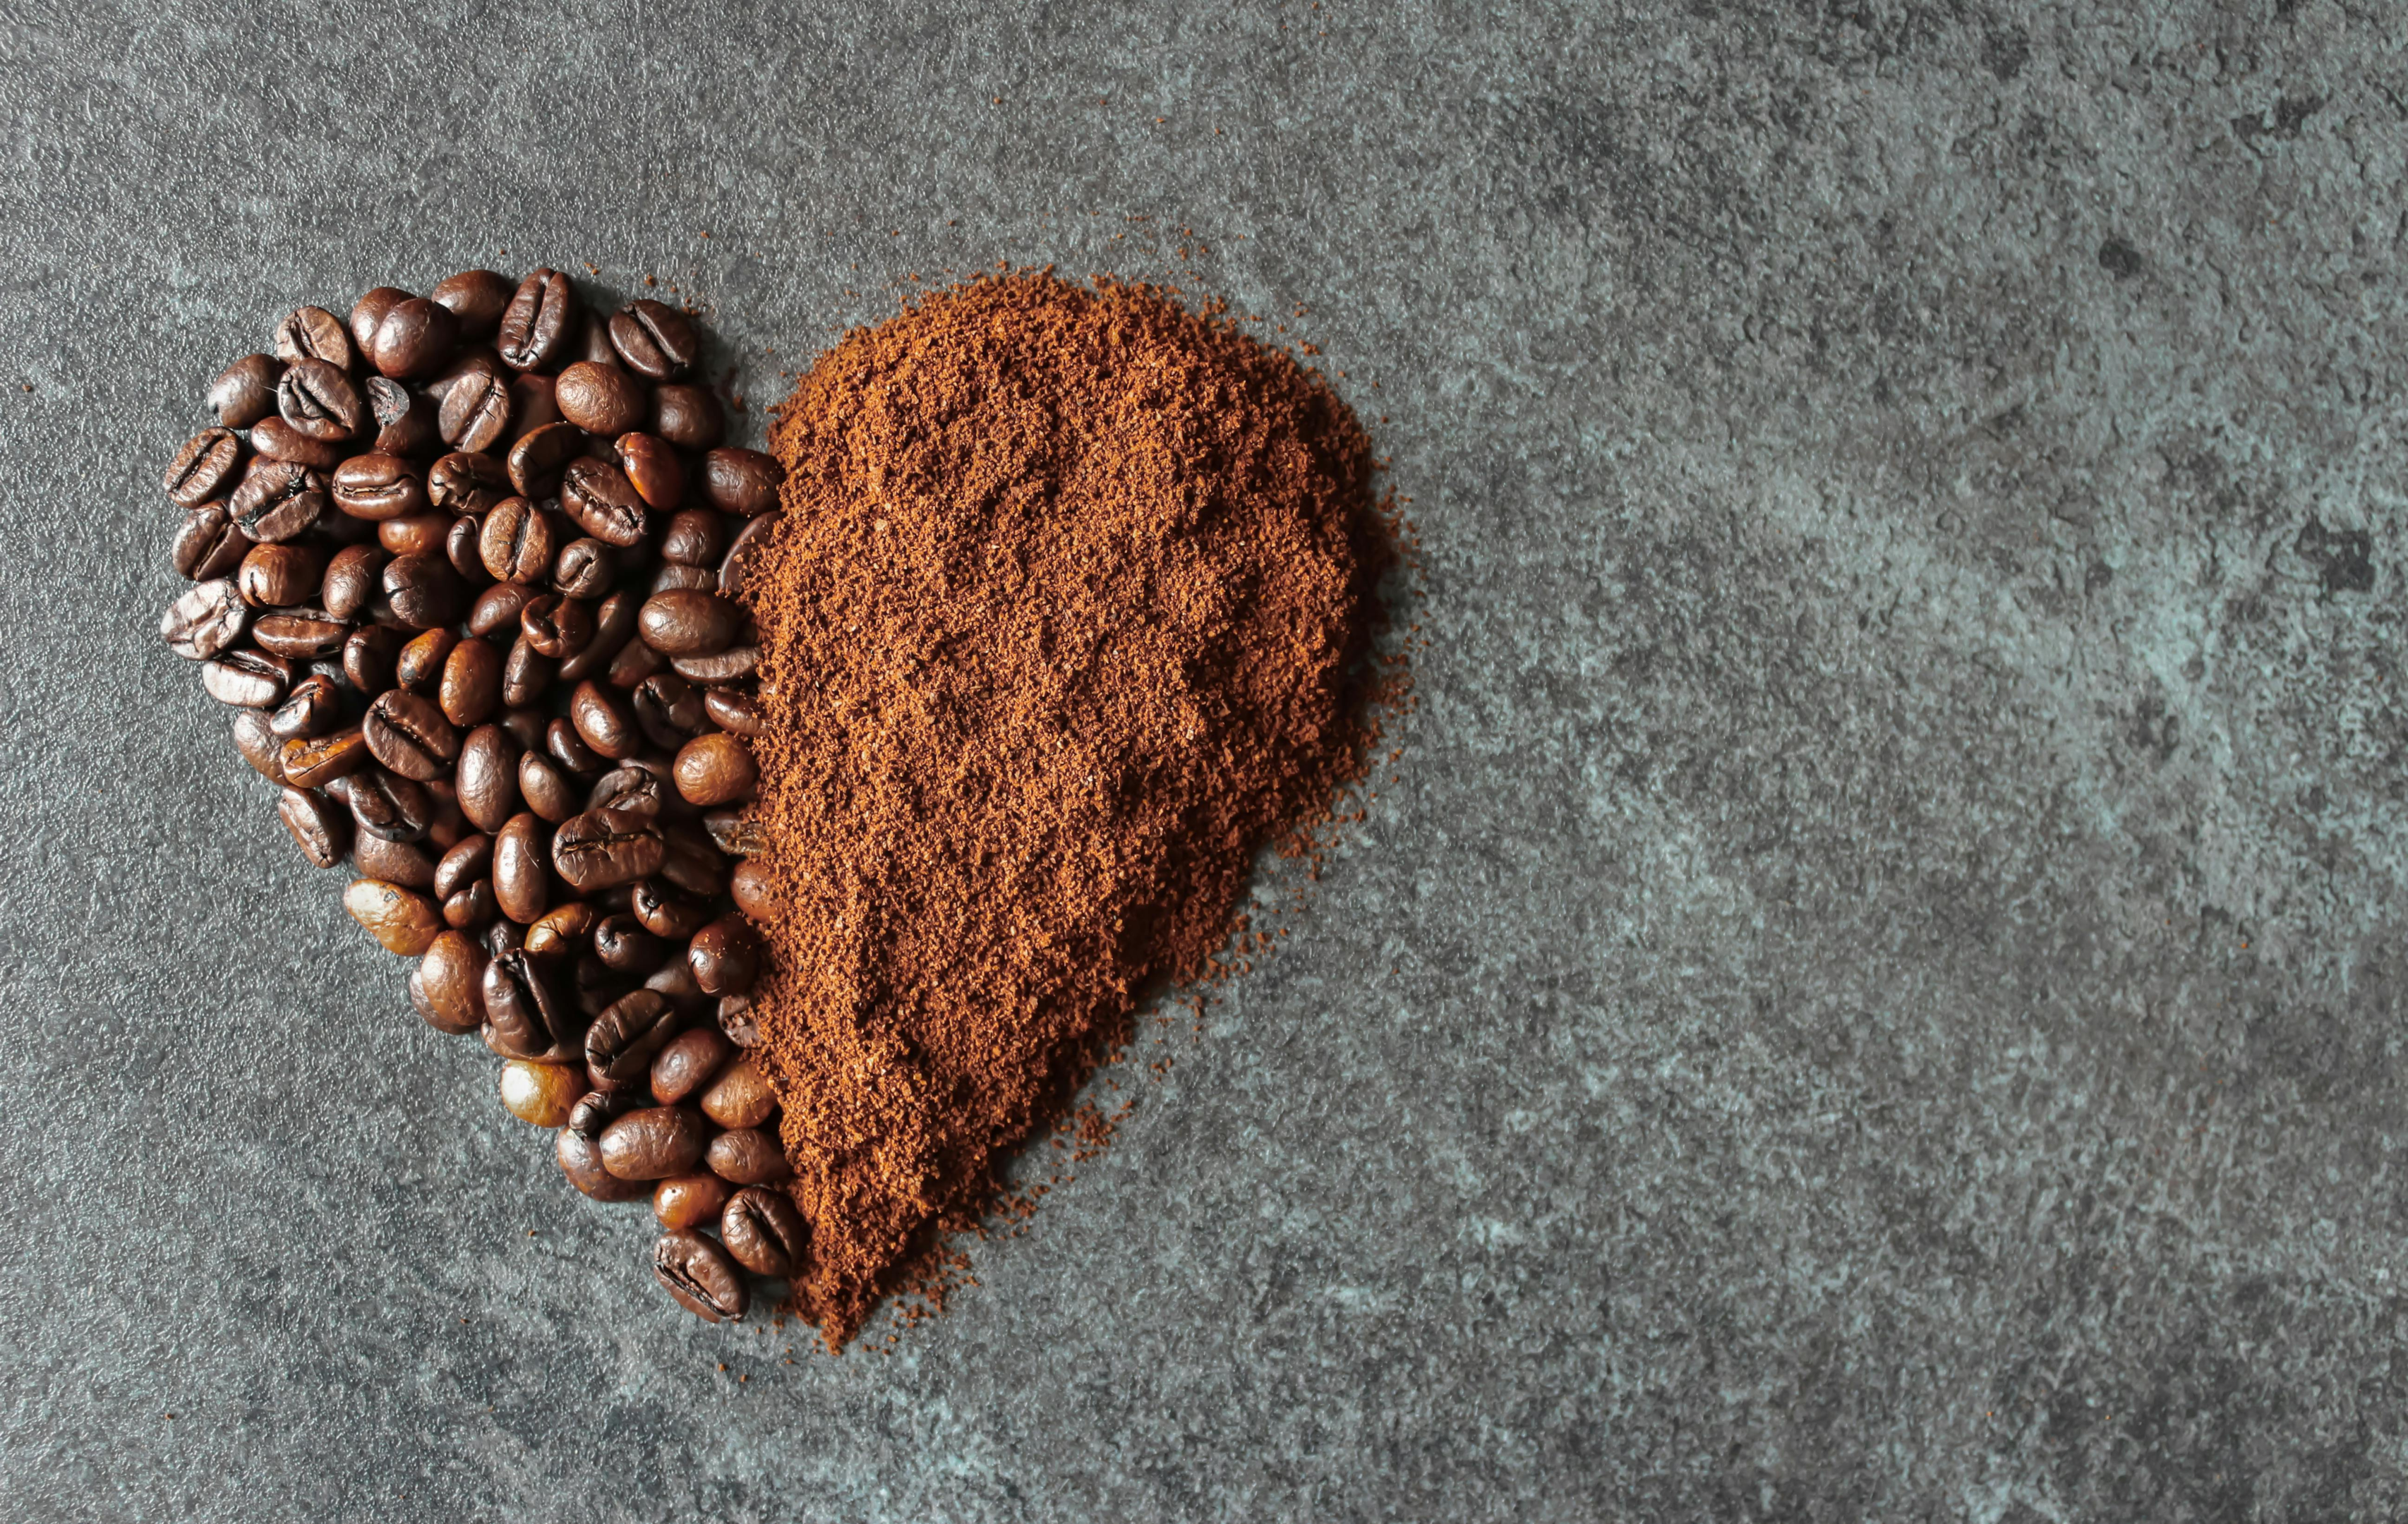 heart shape filled with brown coffee beans and fine coffee grounds on granite background